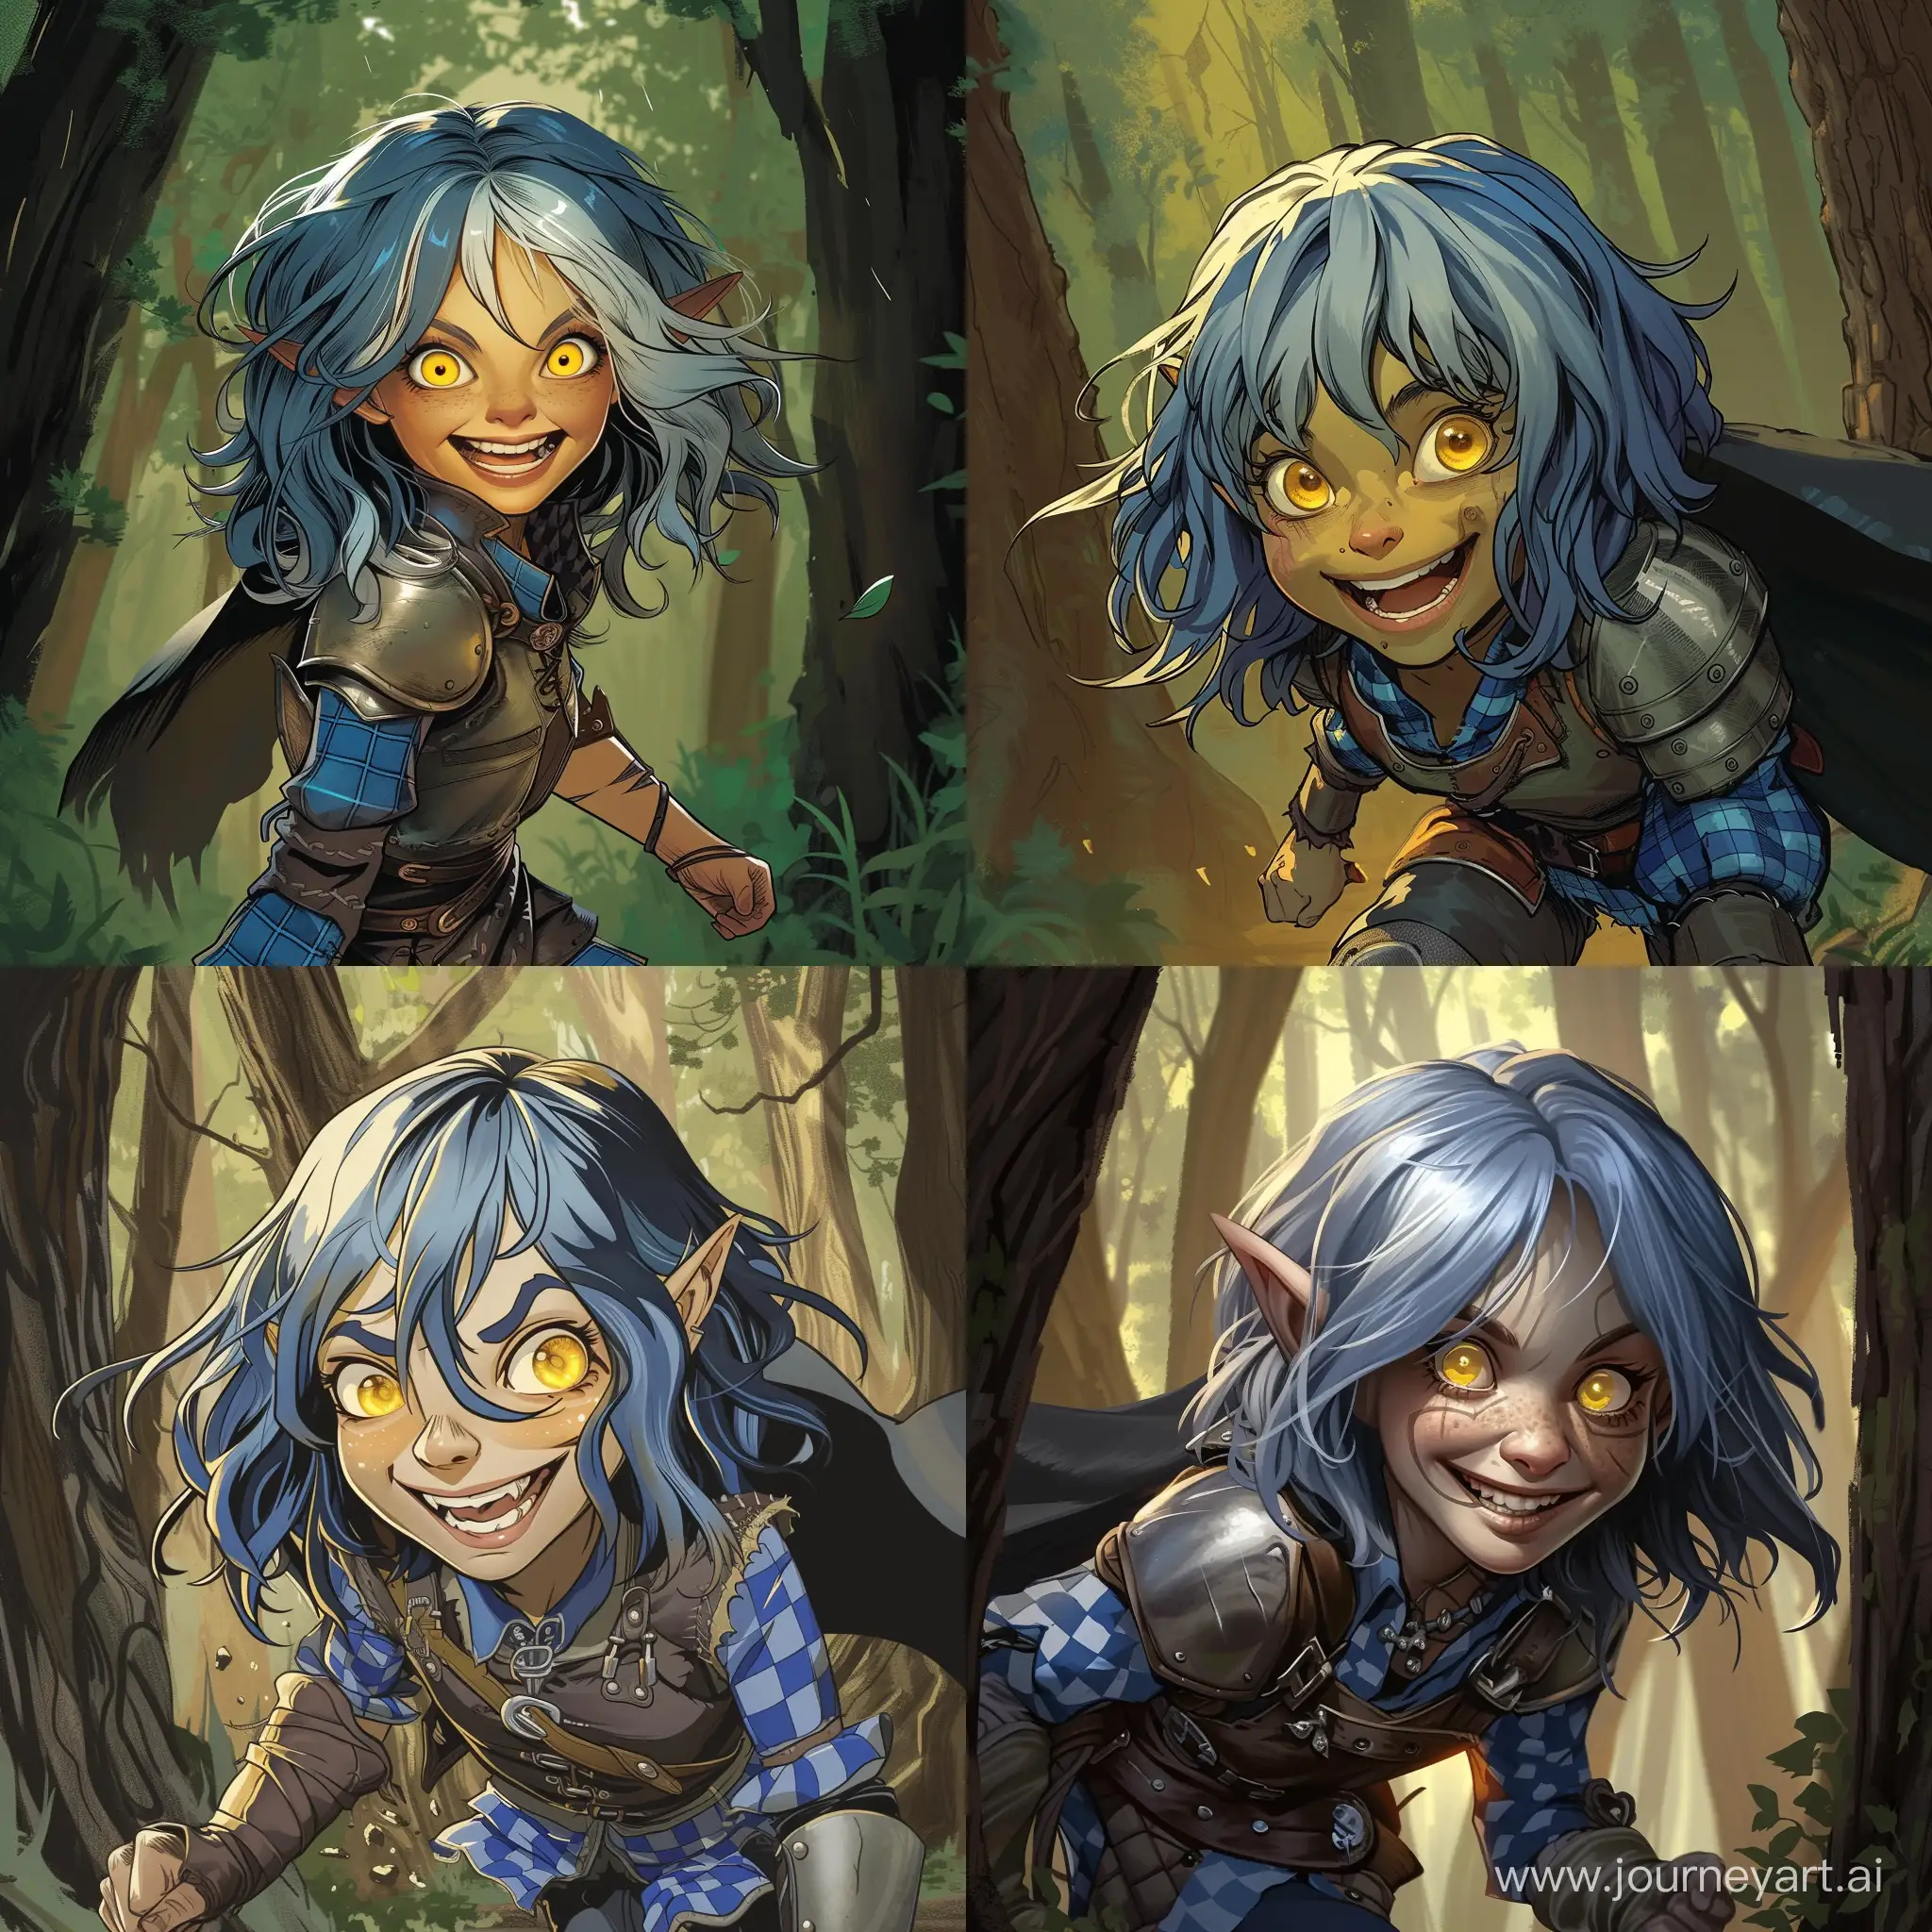 Draw a character from the Dungeons and Dragons universe according to the following description: She is a half-elf warlock with shoulder-lenght blue hair with silver streaks and yellow eyes. She has light beige skin, and crazed happy smile on her young face.
The girl is dressed in a leather armor with blue checkered shirt underneath. There is a black cloack behind her back.
She is running through the woods searching for an adventure